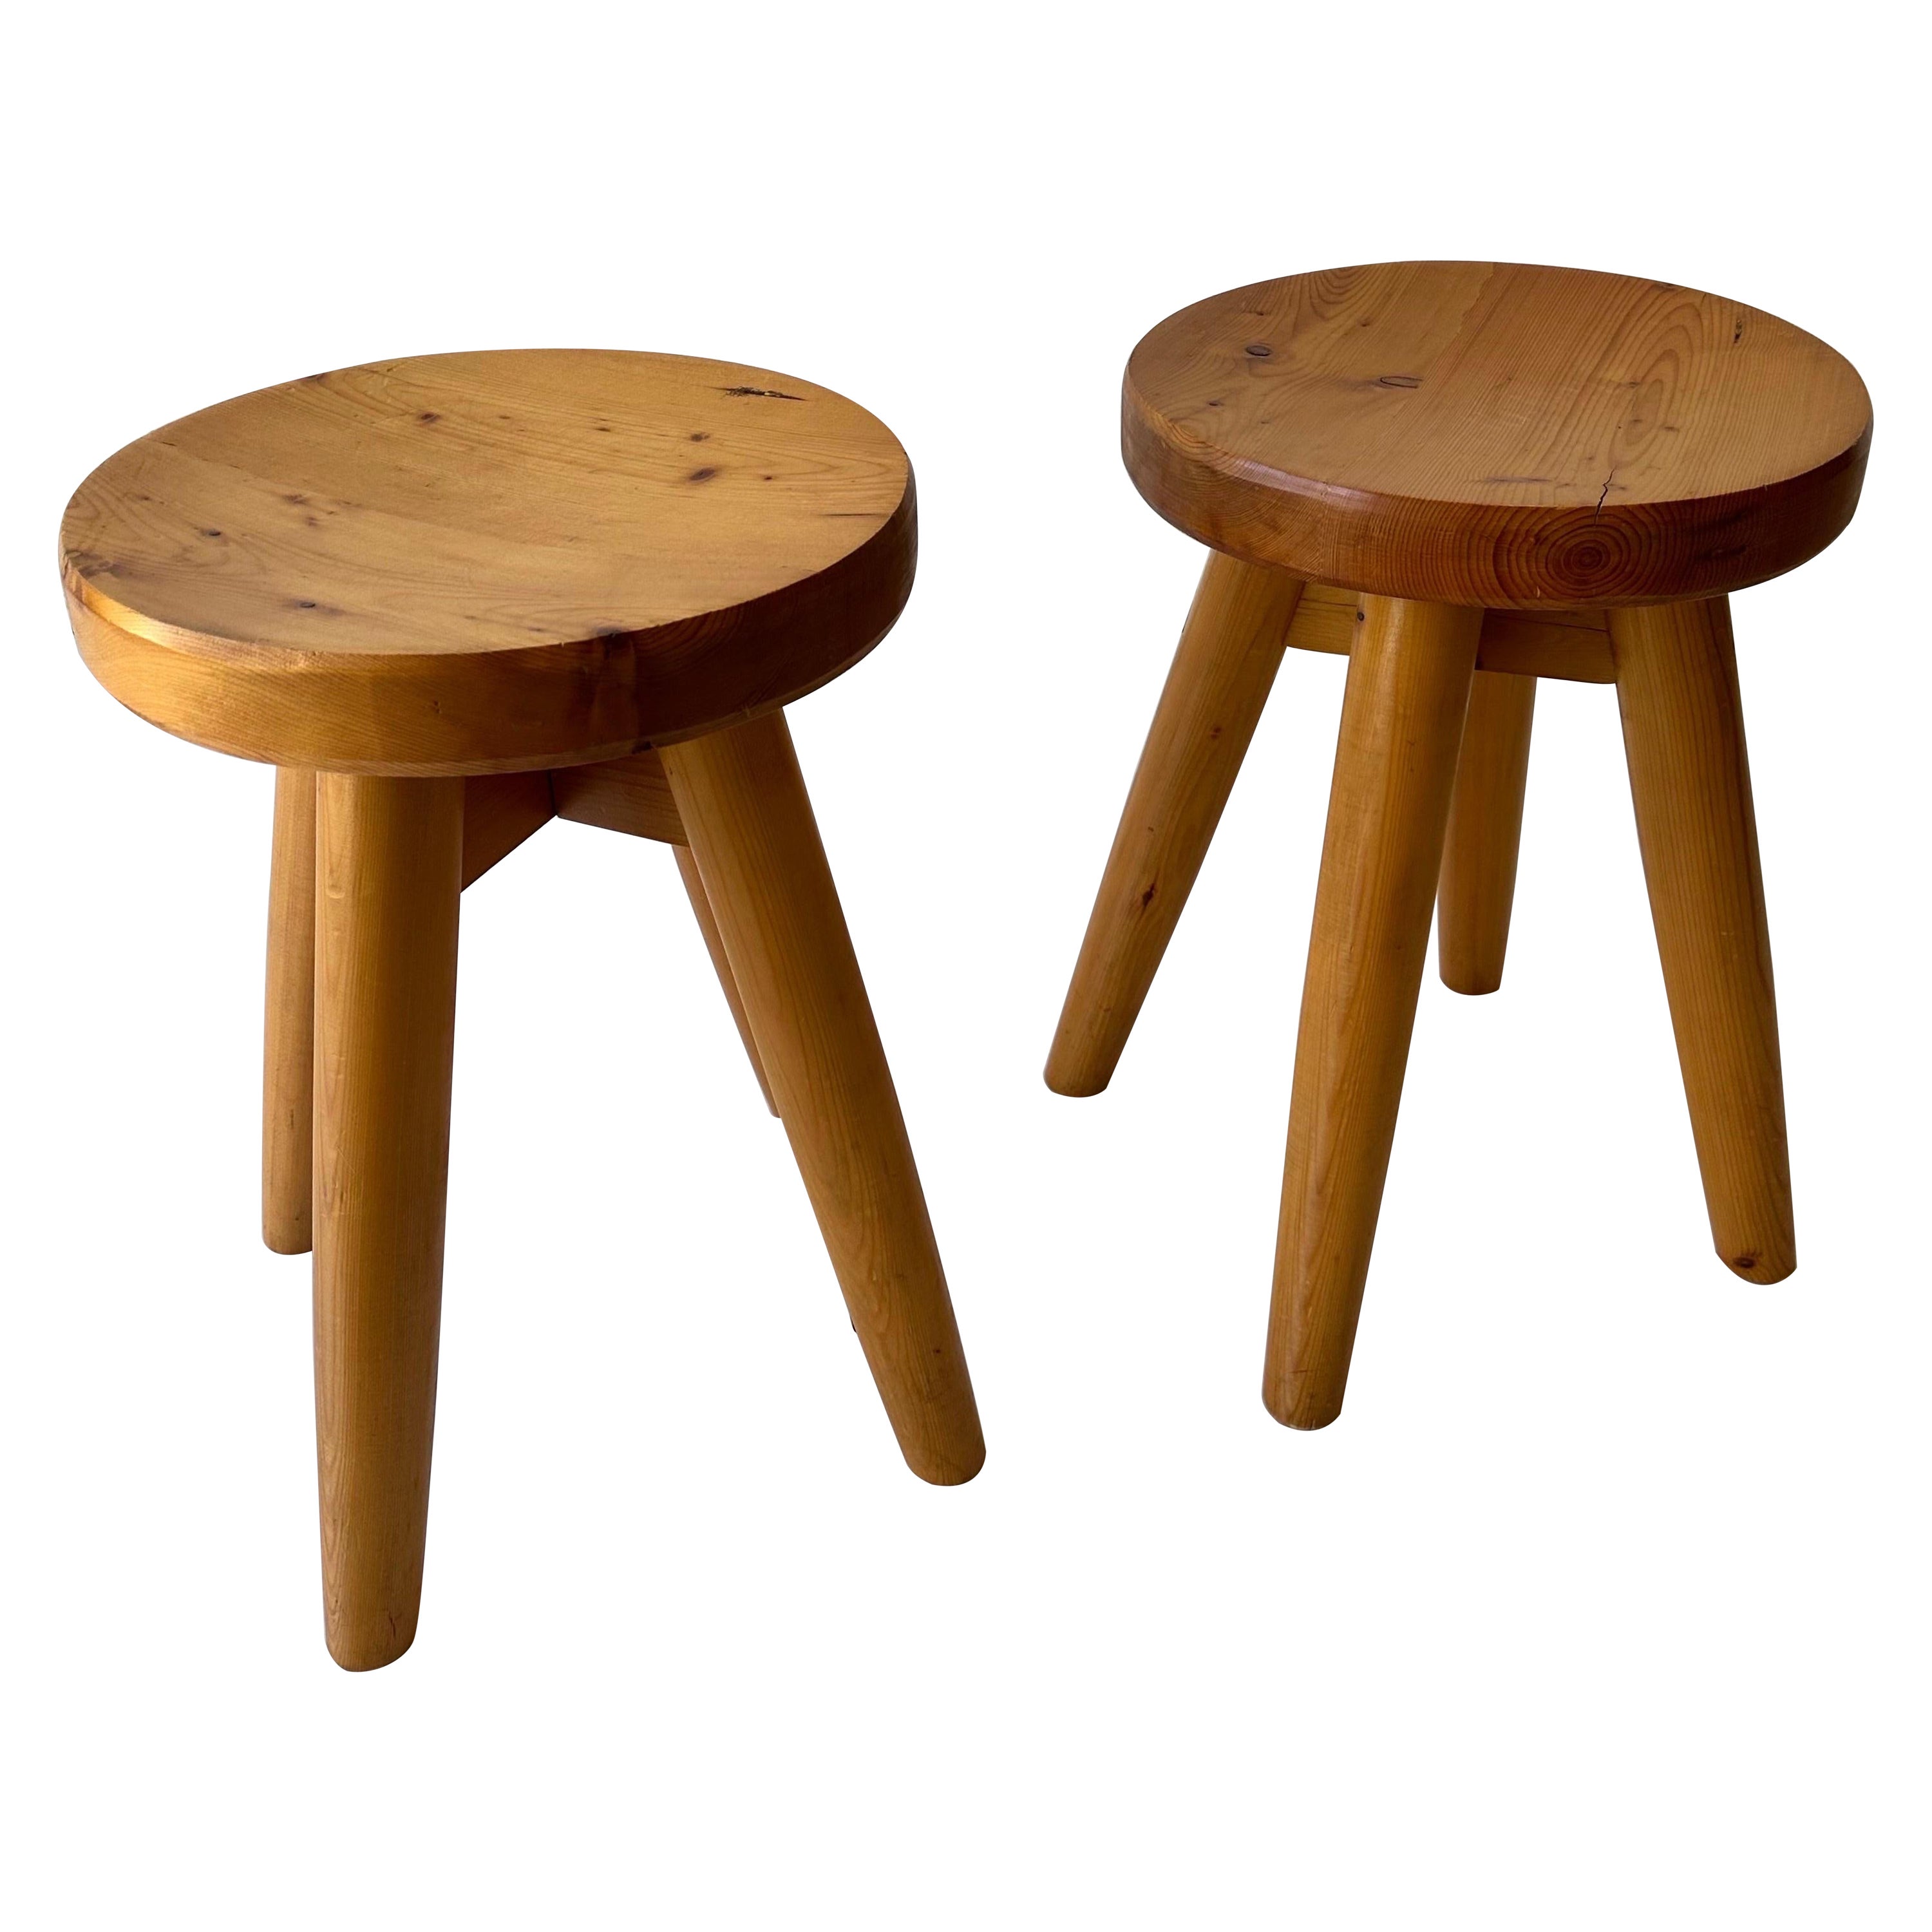 Pair of Rene Martin Pine wood Stools For Sale